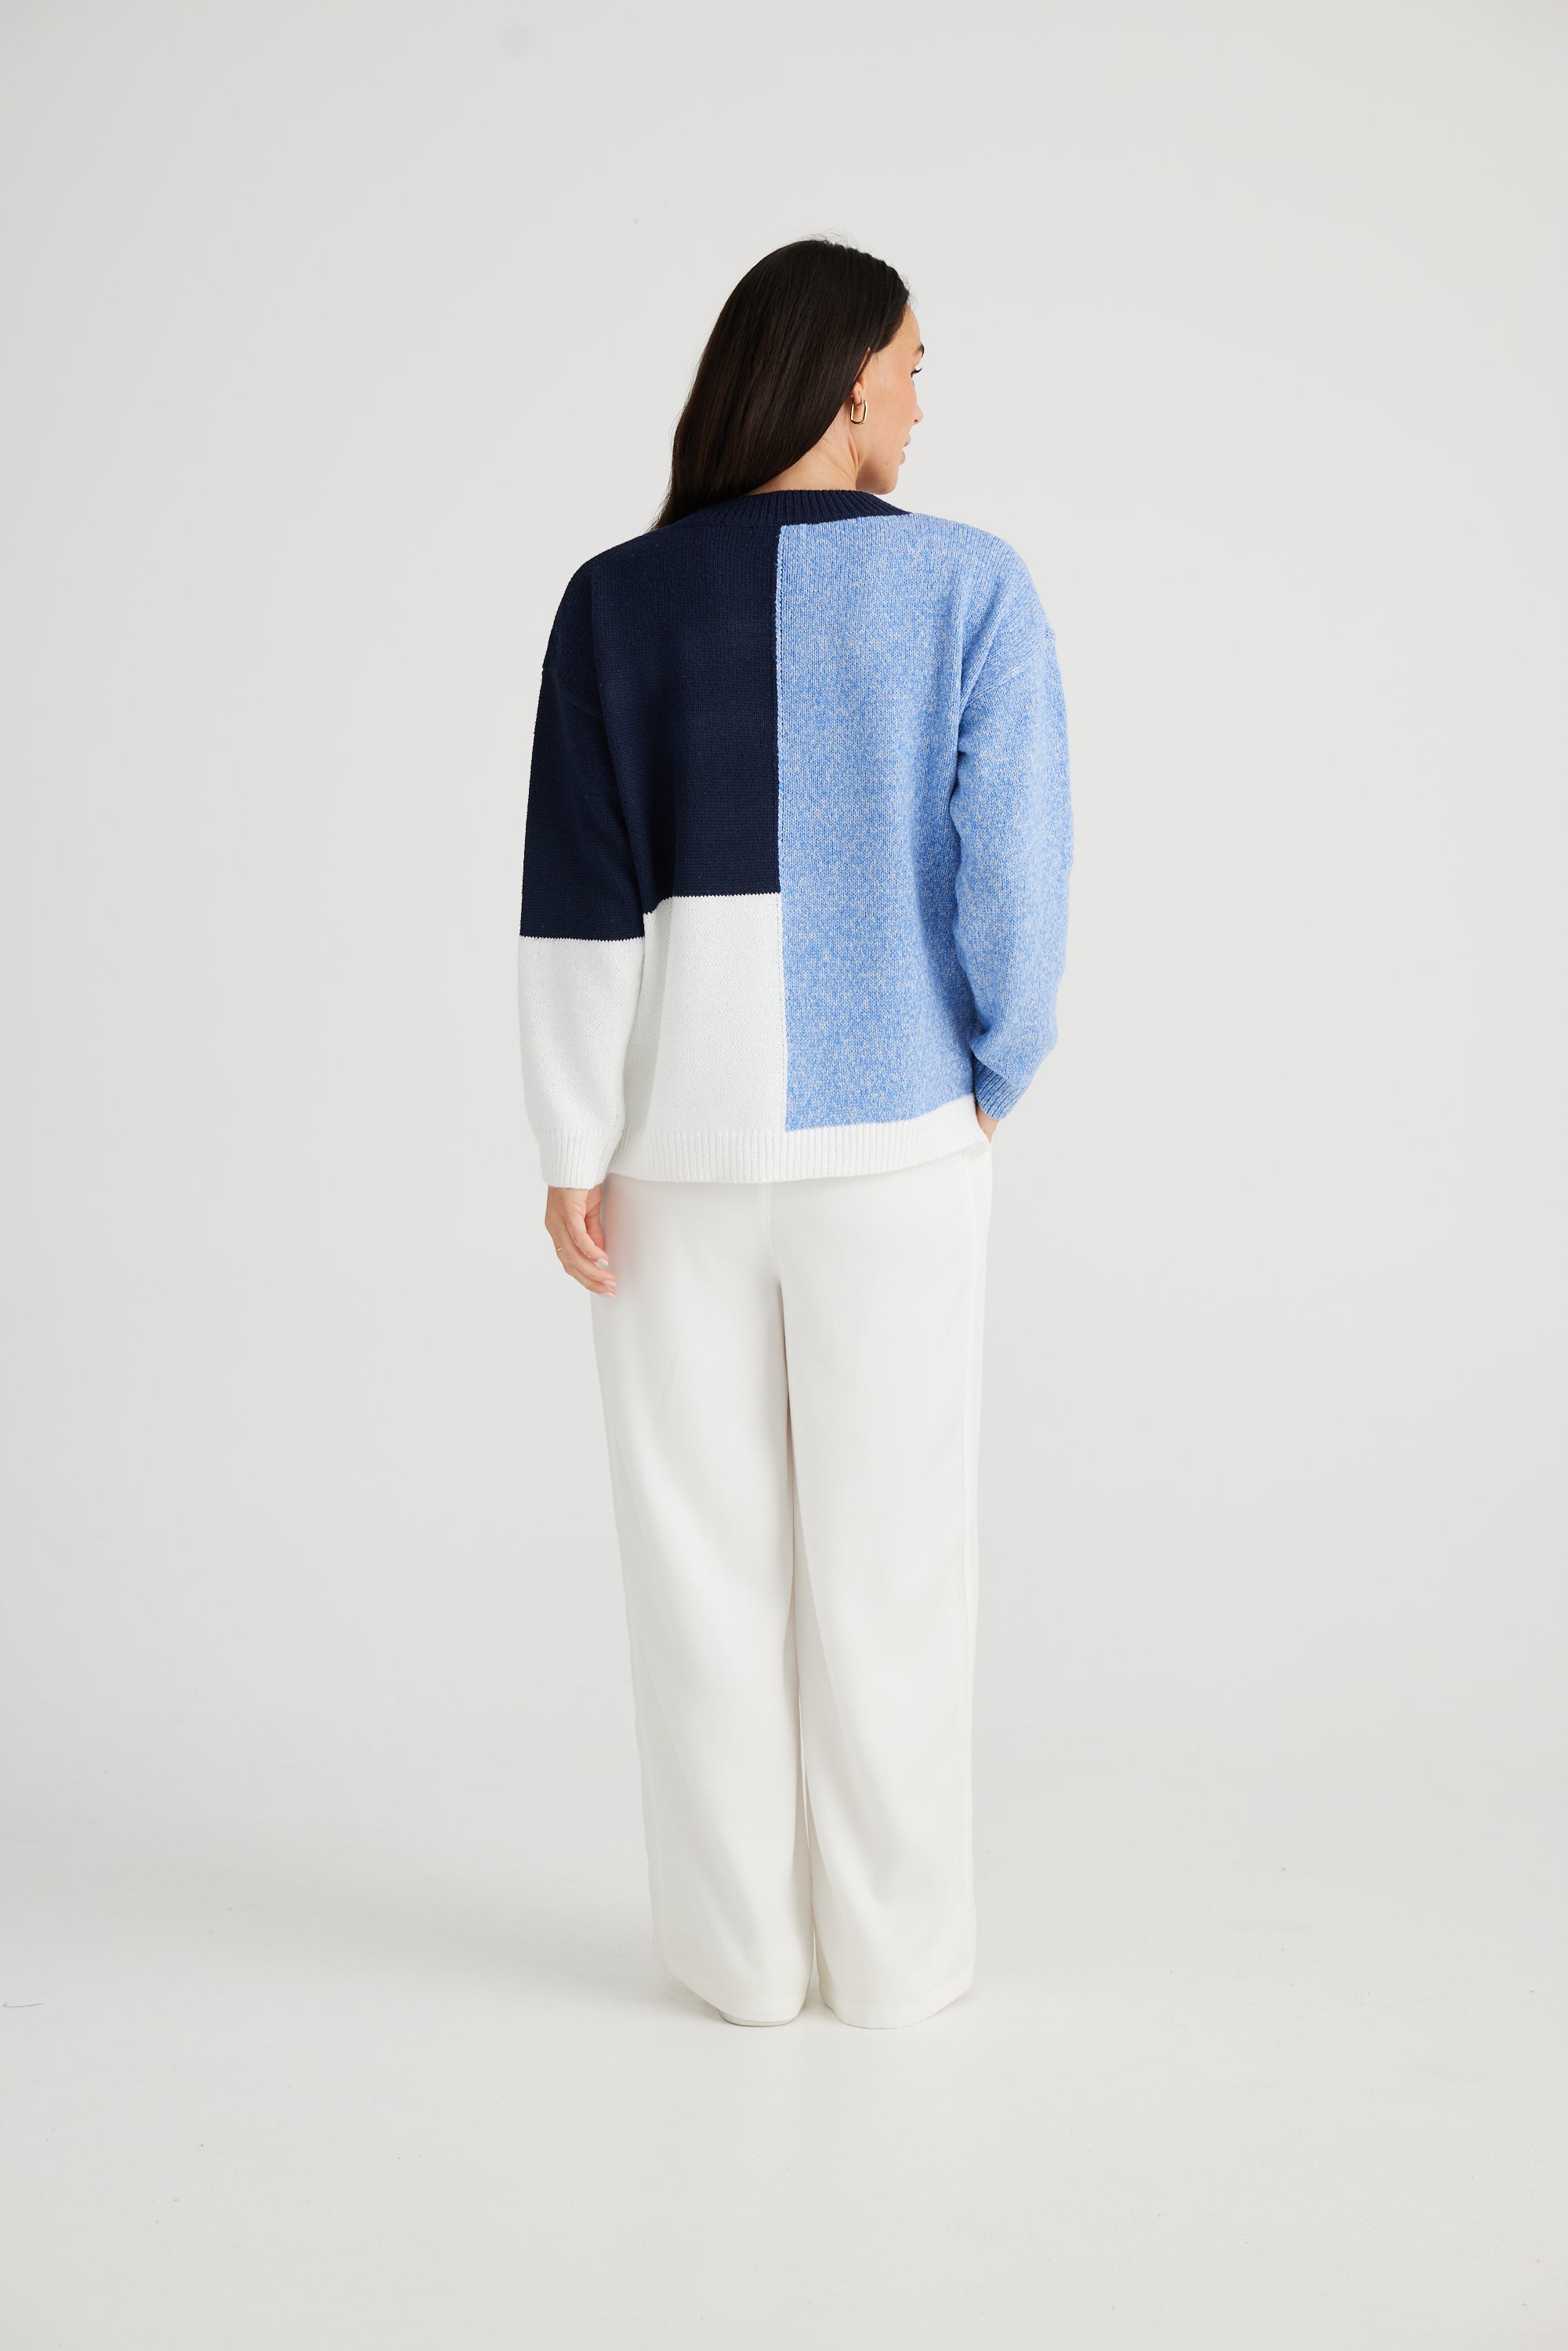 Brave and True Harmony Knit Blue